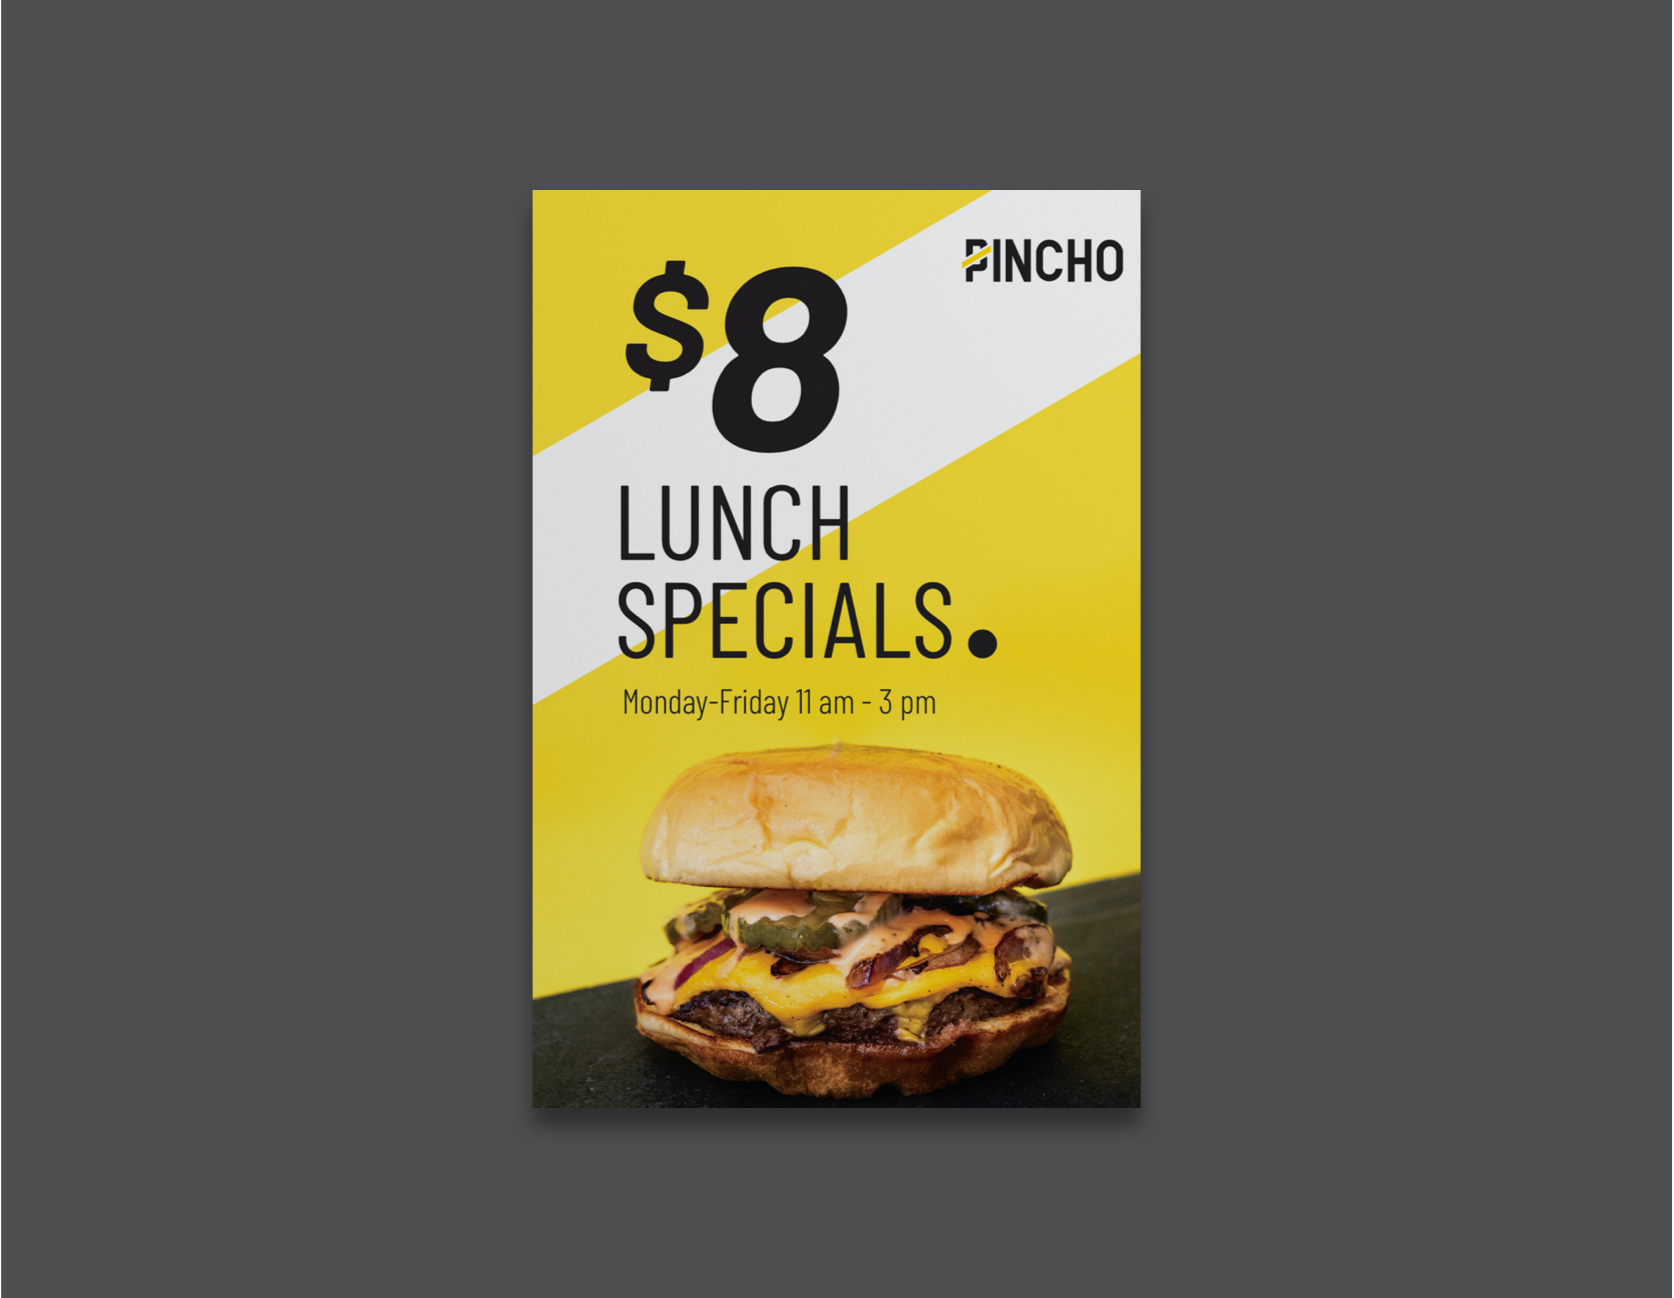 Image of menu design featuring $8 lunch specials.